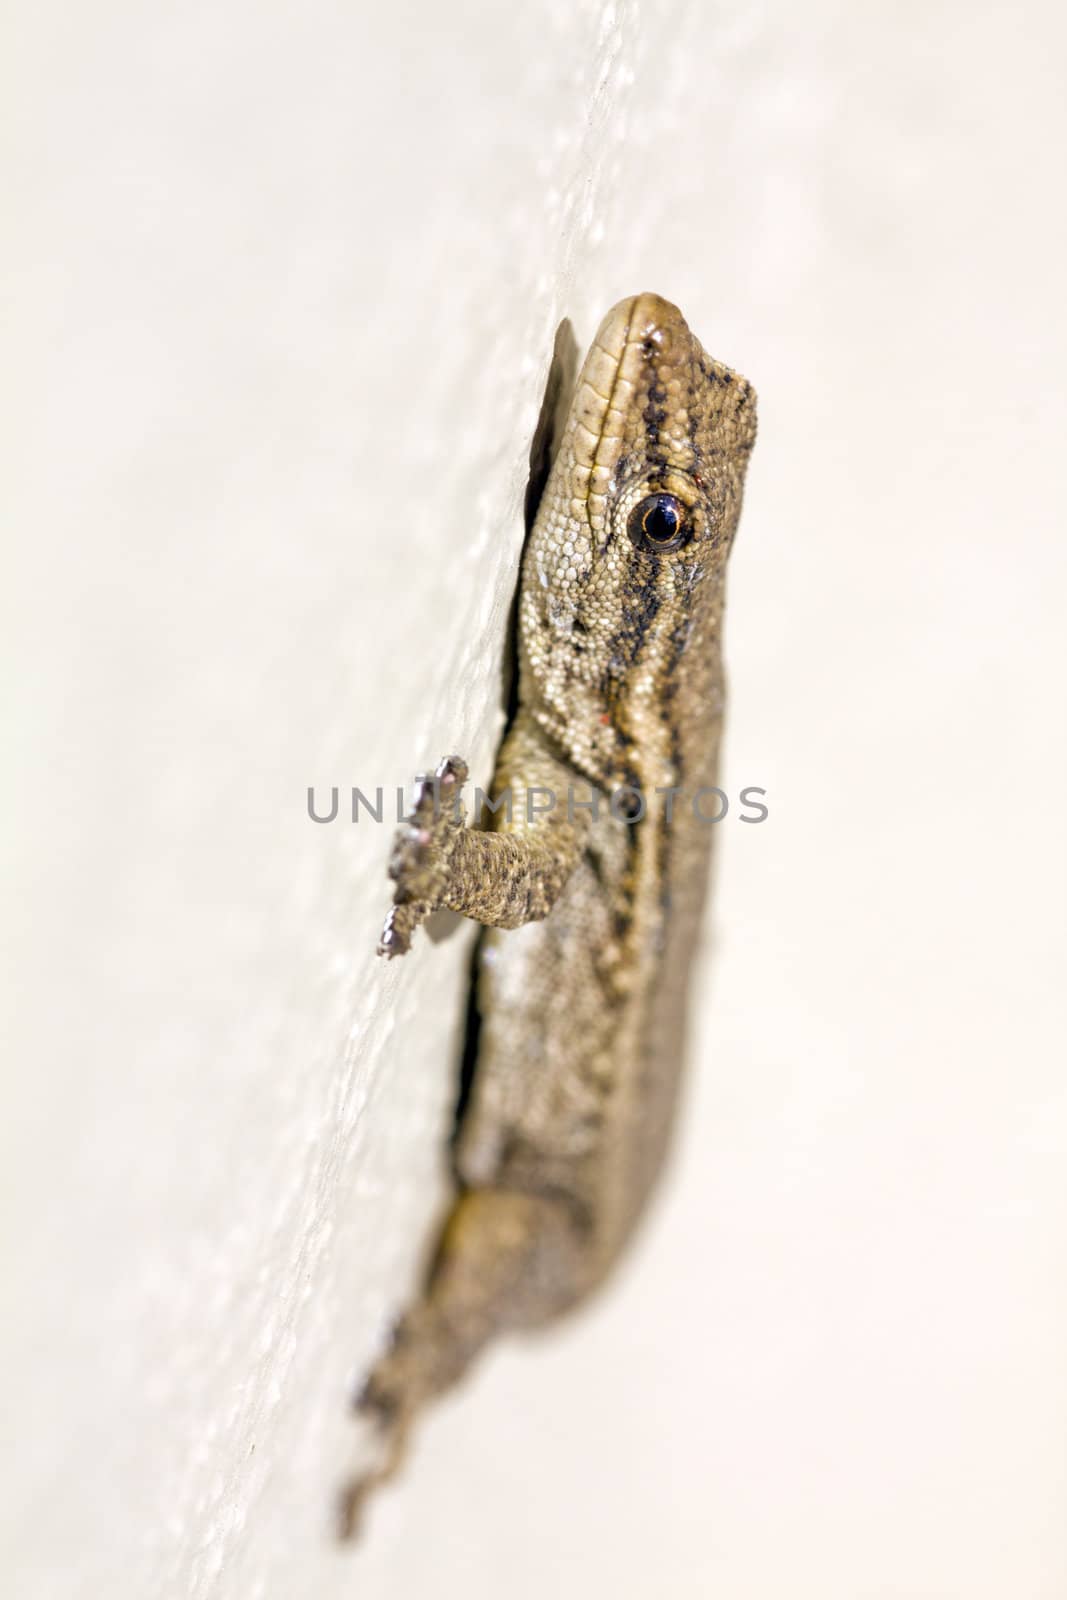 Macro of a young lizard in South Africa by ChrisAlleaume